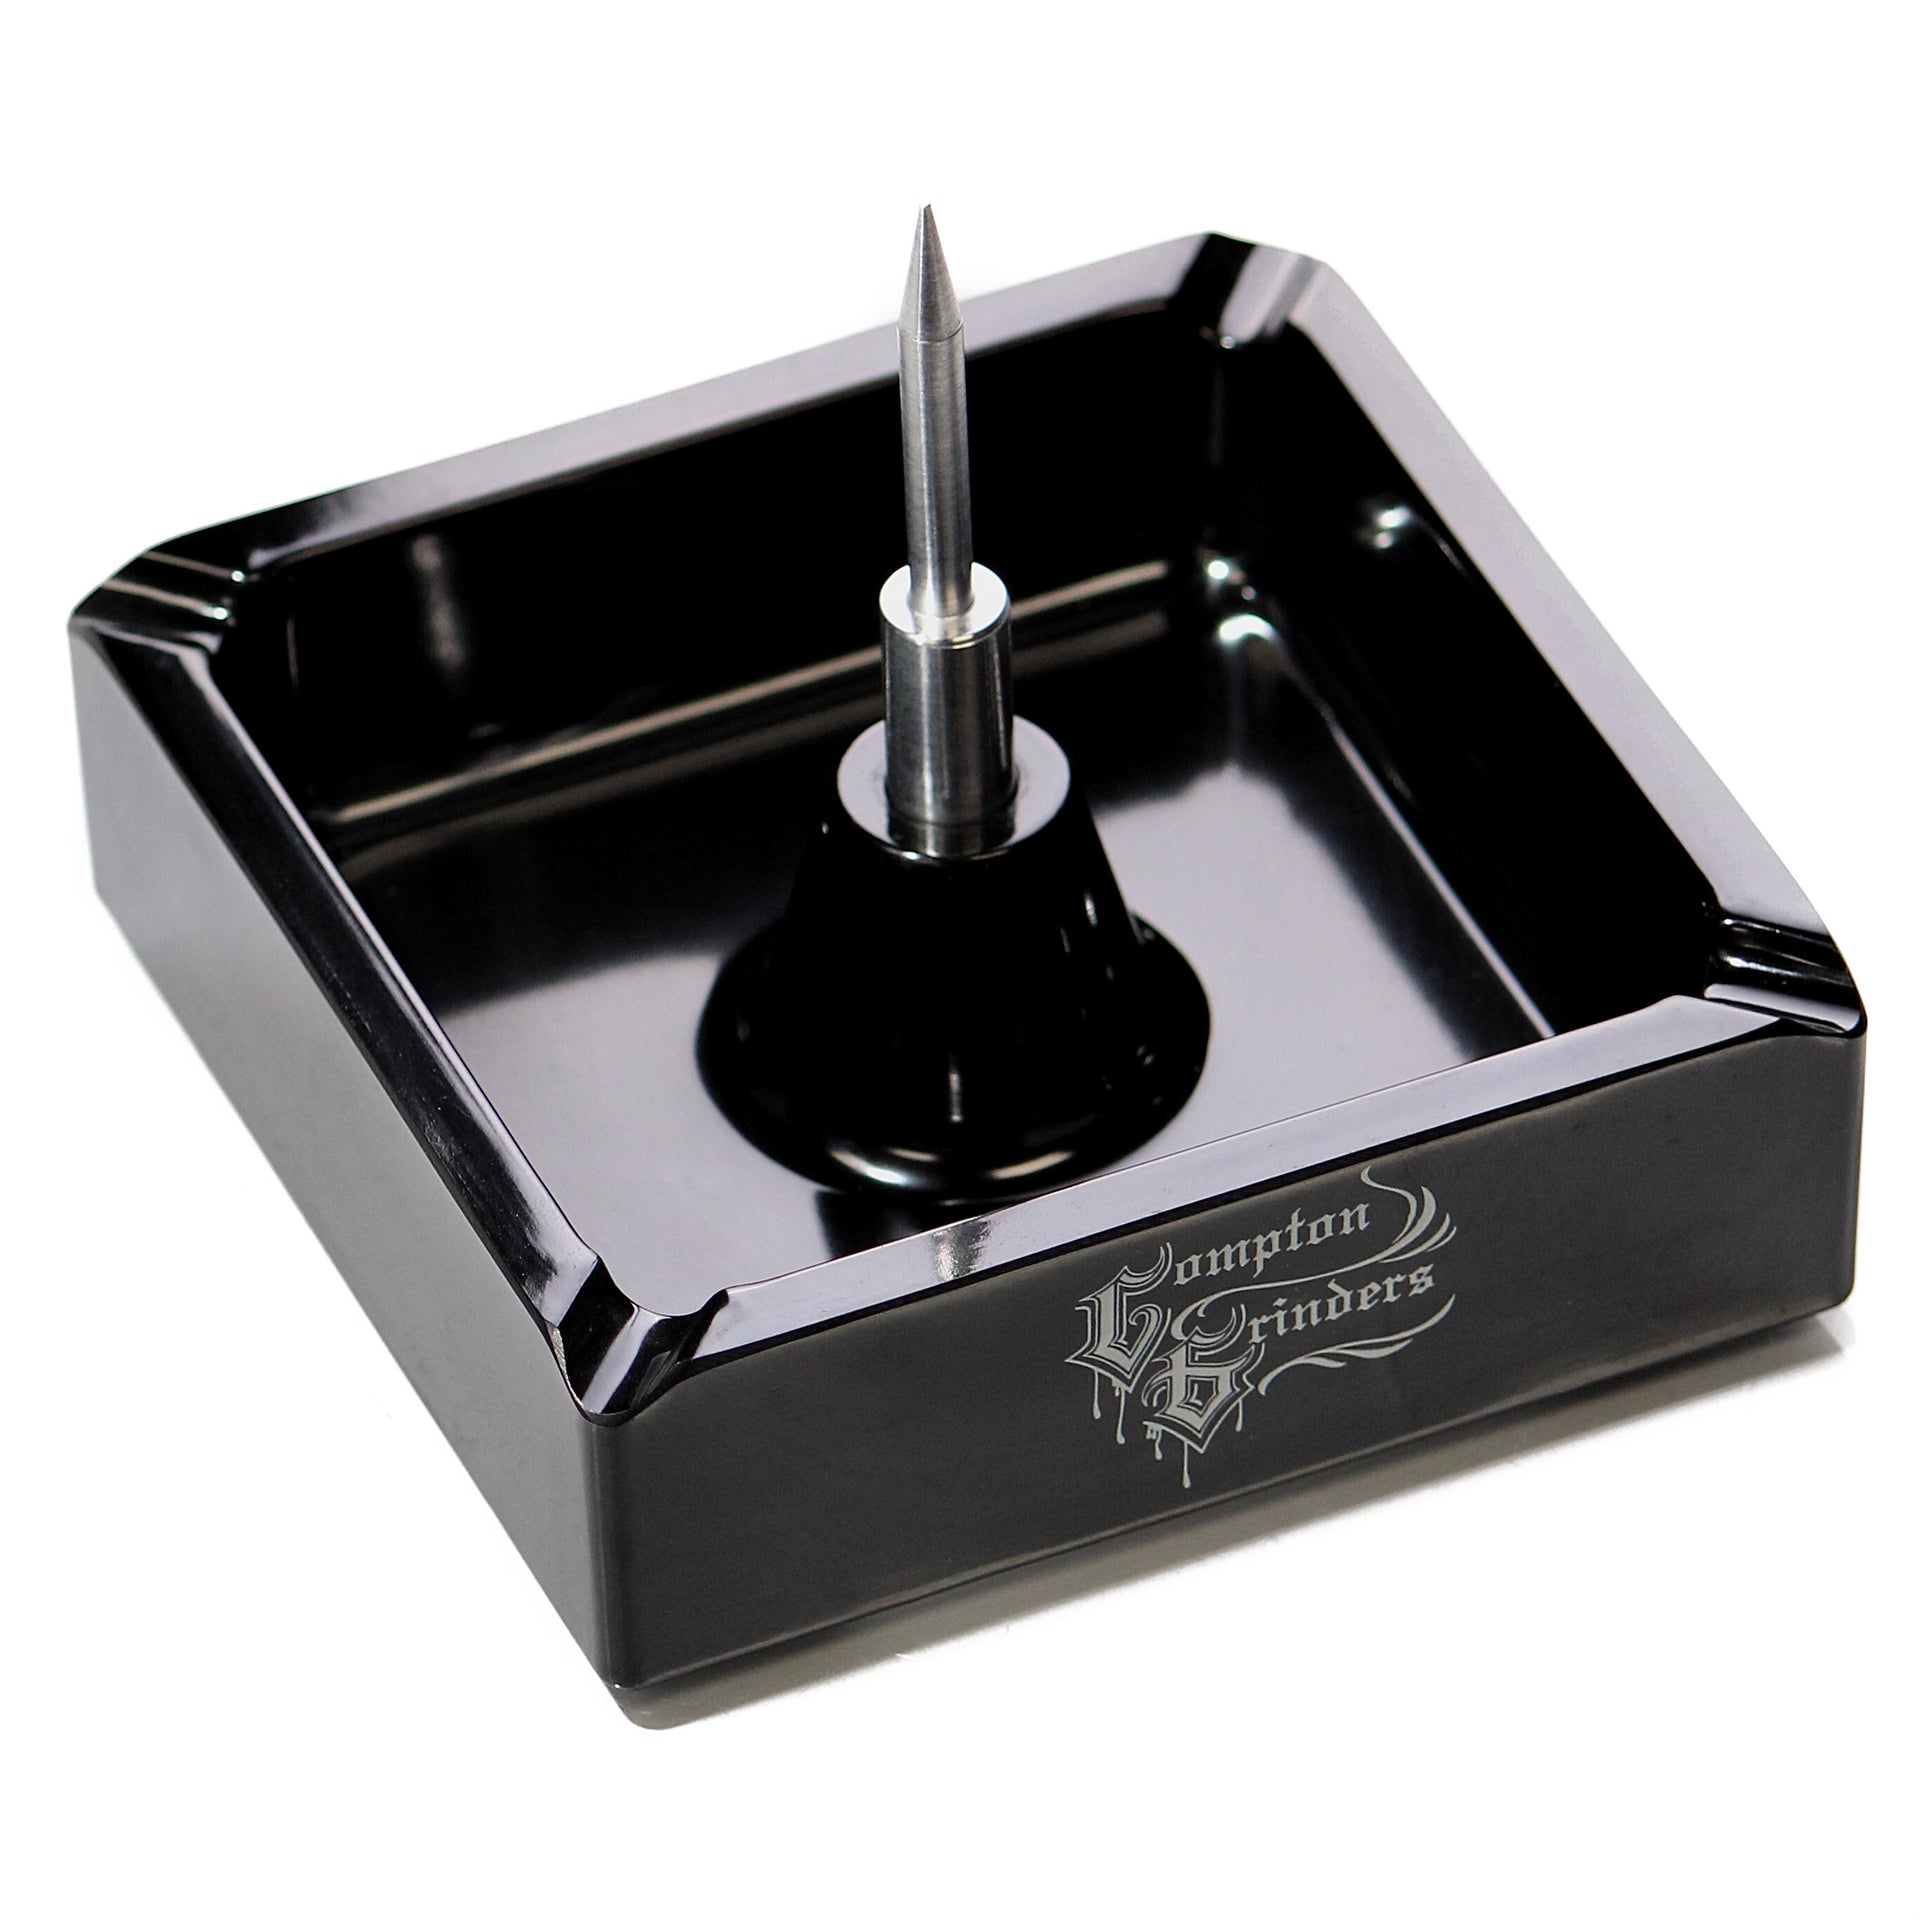 Compton Grinders ashtray with poker